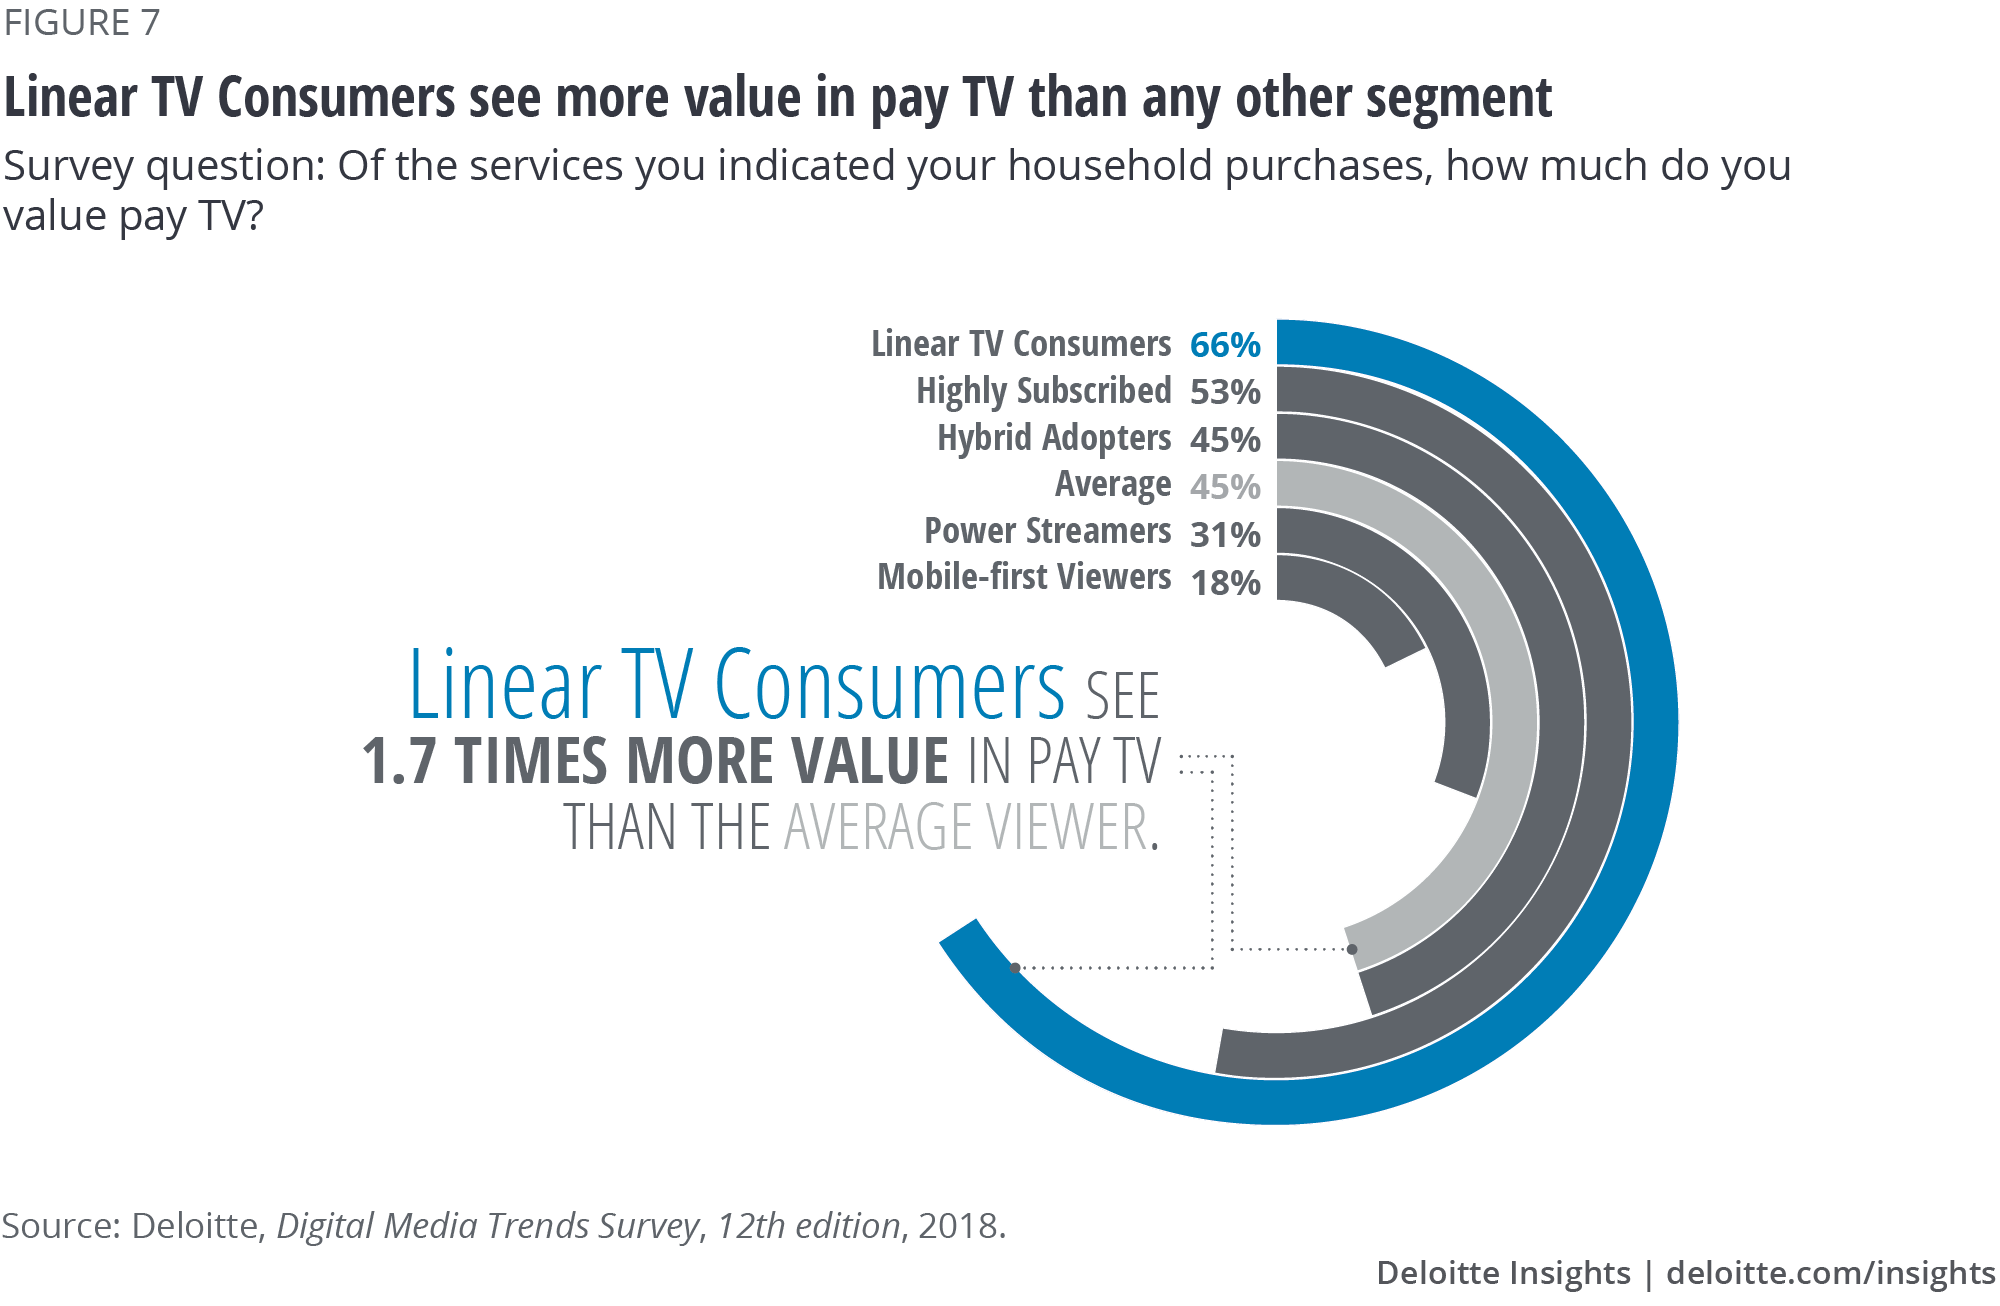 Linear TV Consumers see more value in pay TV than any other segment